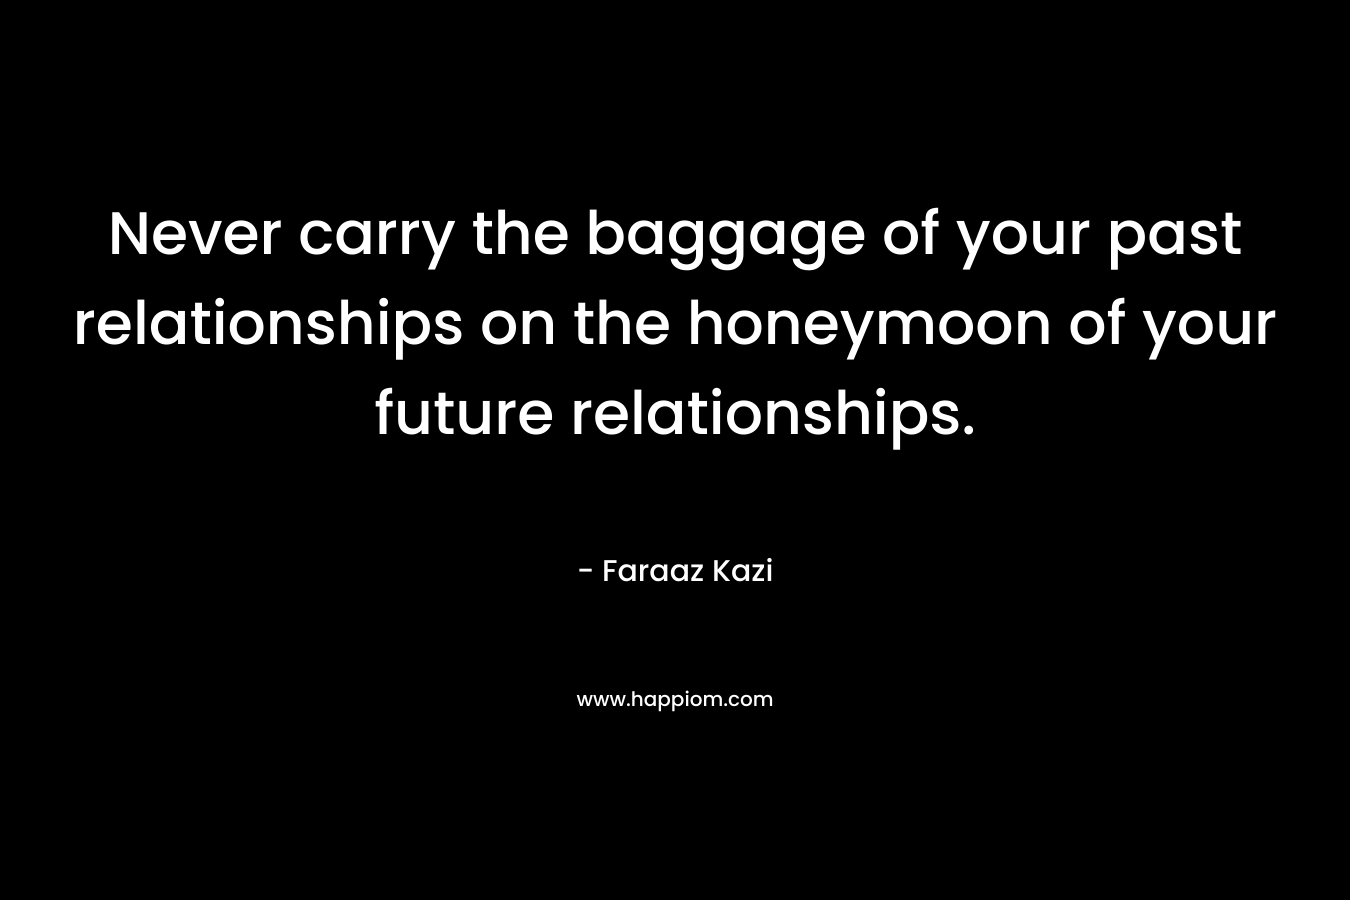 Never carry the baggage of your past relationships on the honeymoon of your future relationships.